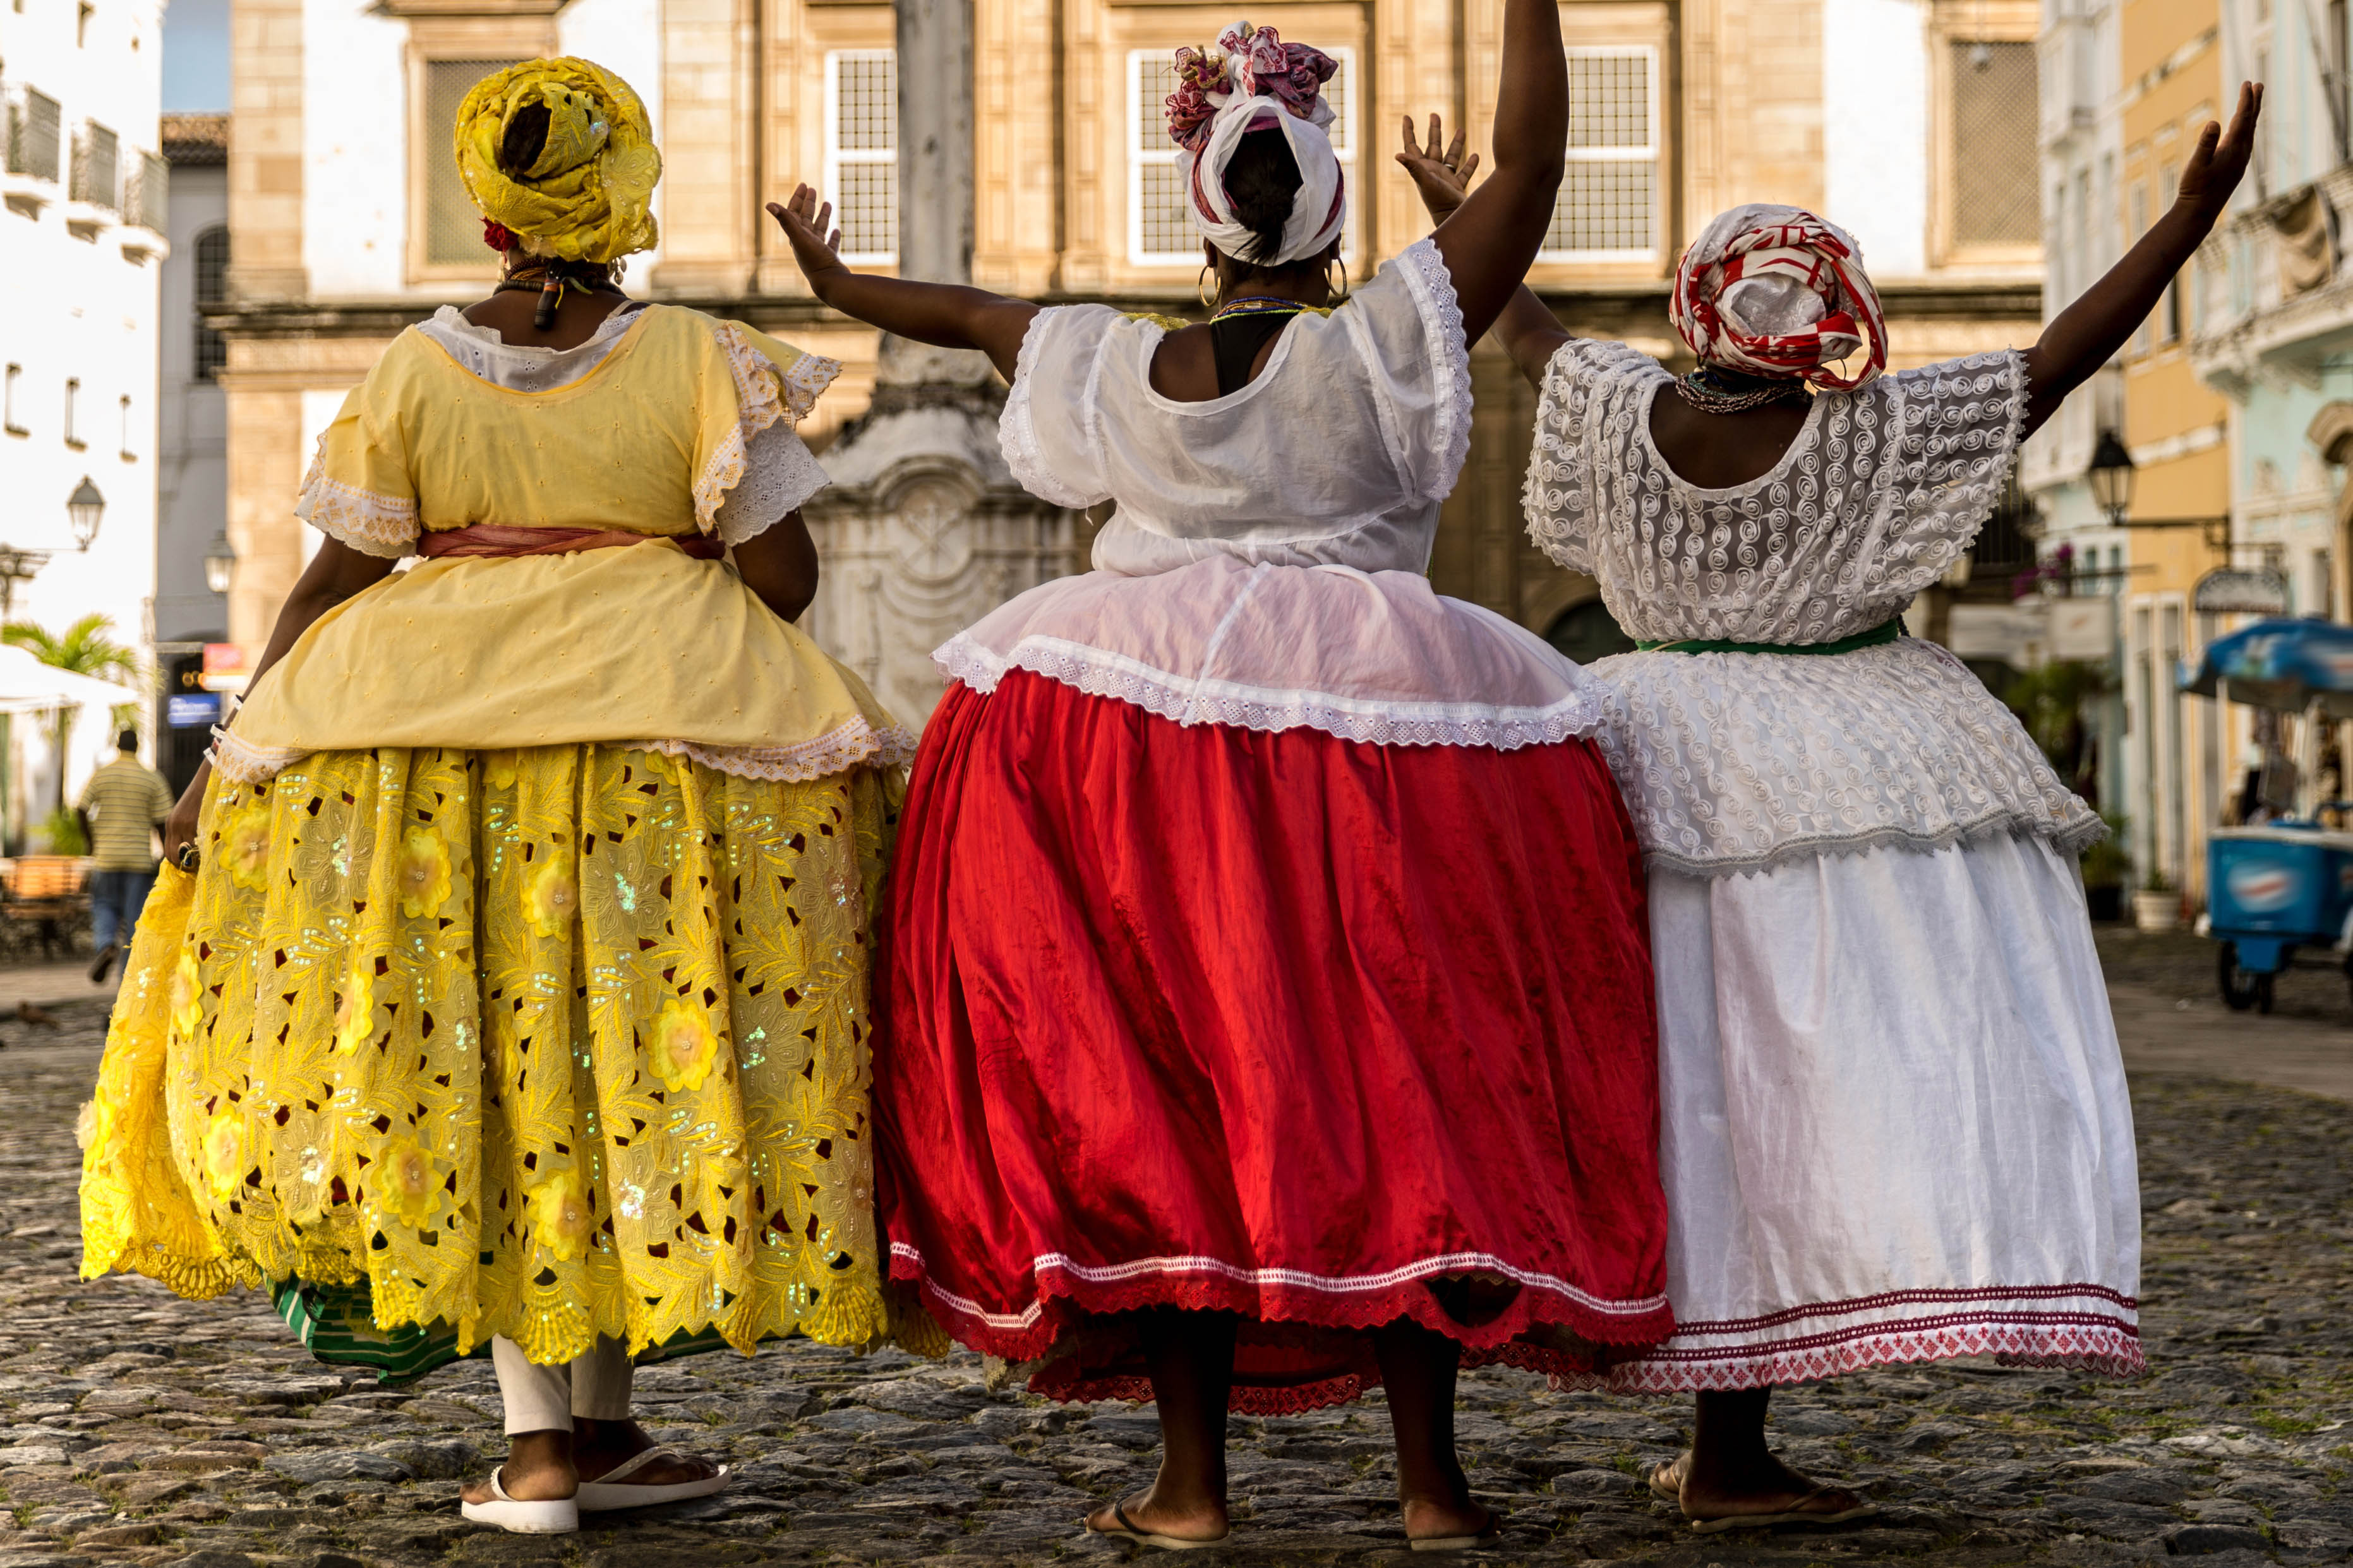 See the dancing ladies of Salvador, Brazil | Travel Nation